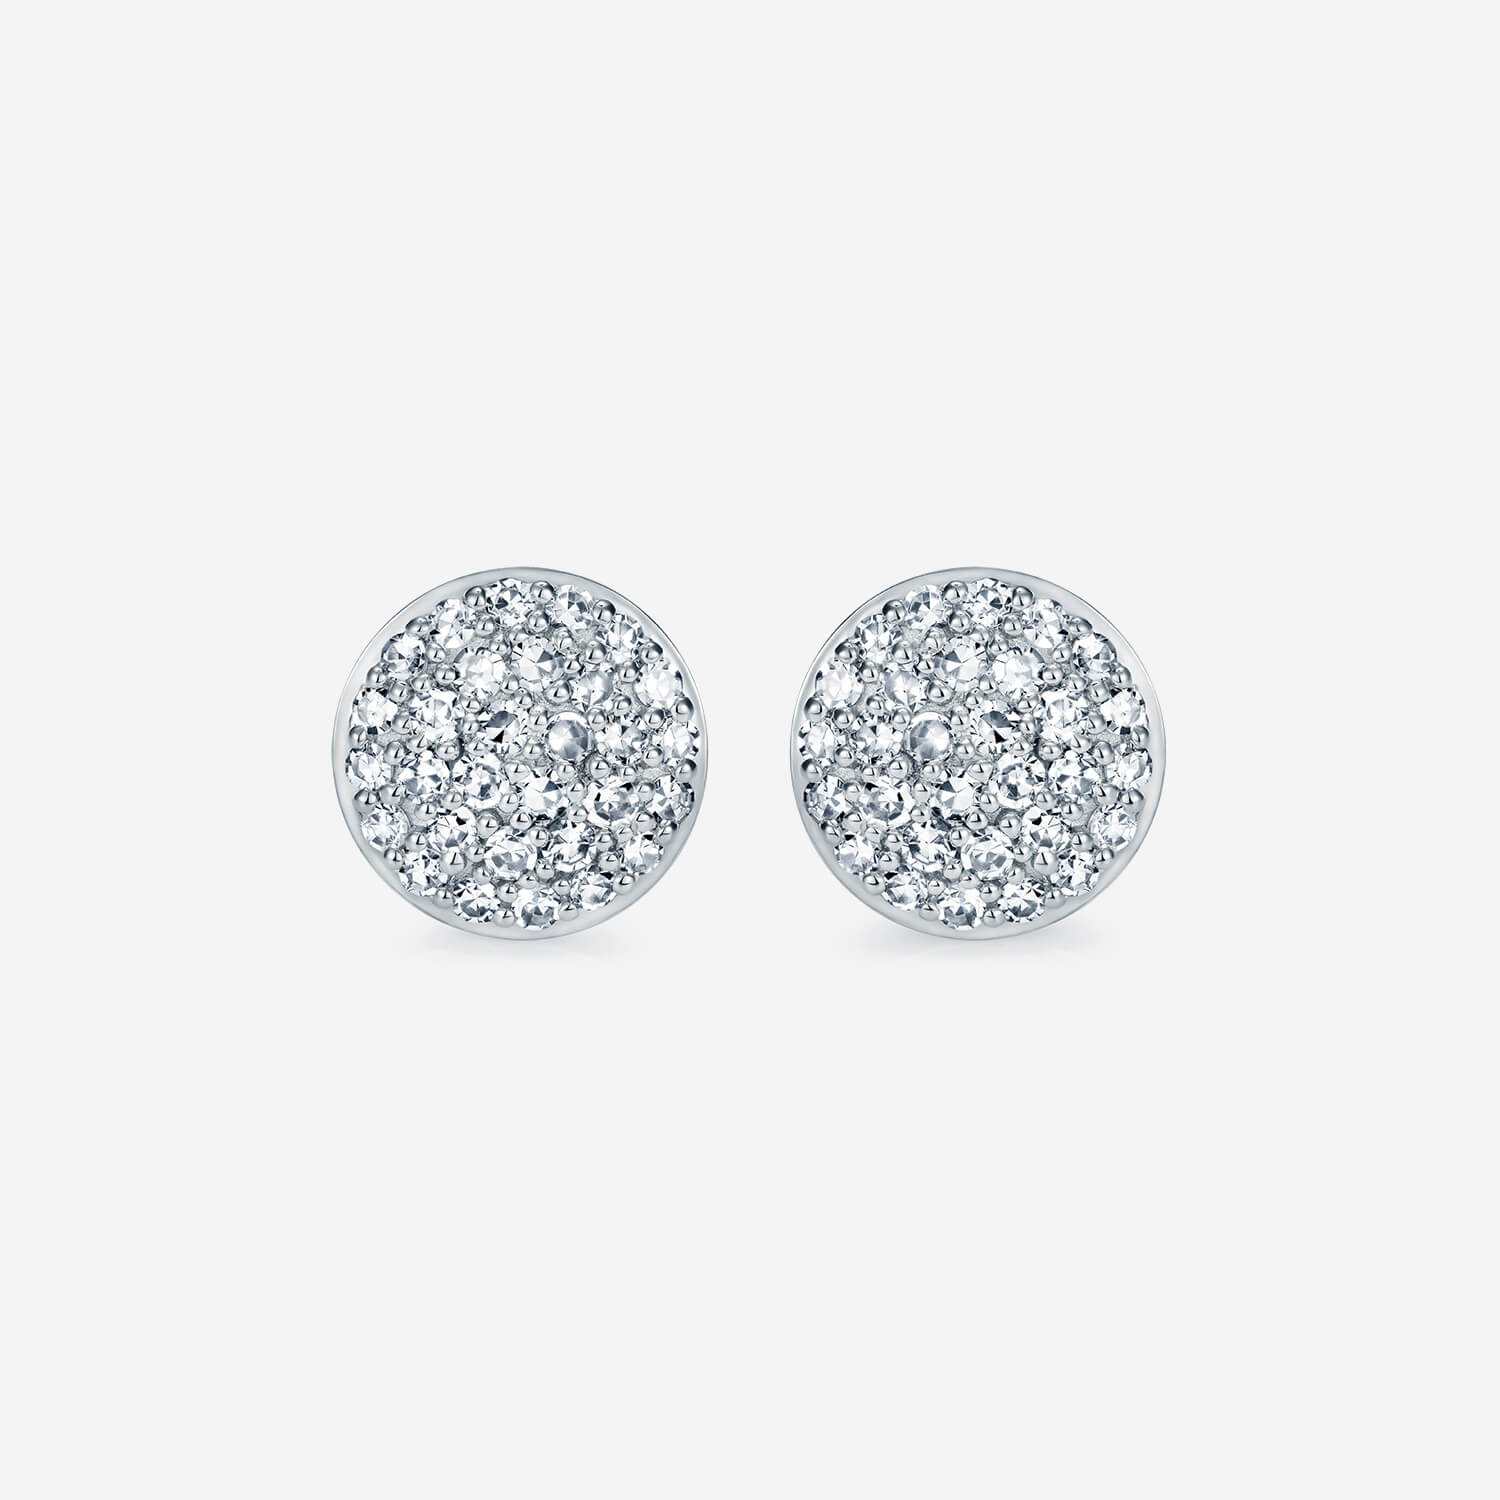 886 Royal Mint Earrings 886 Pavé Large Studs in 18ct White Gold